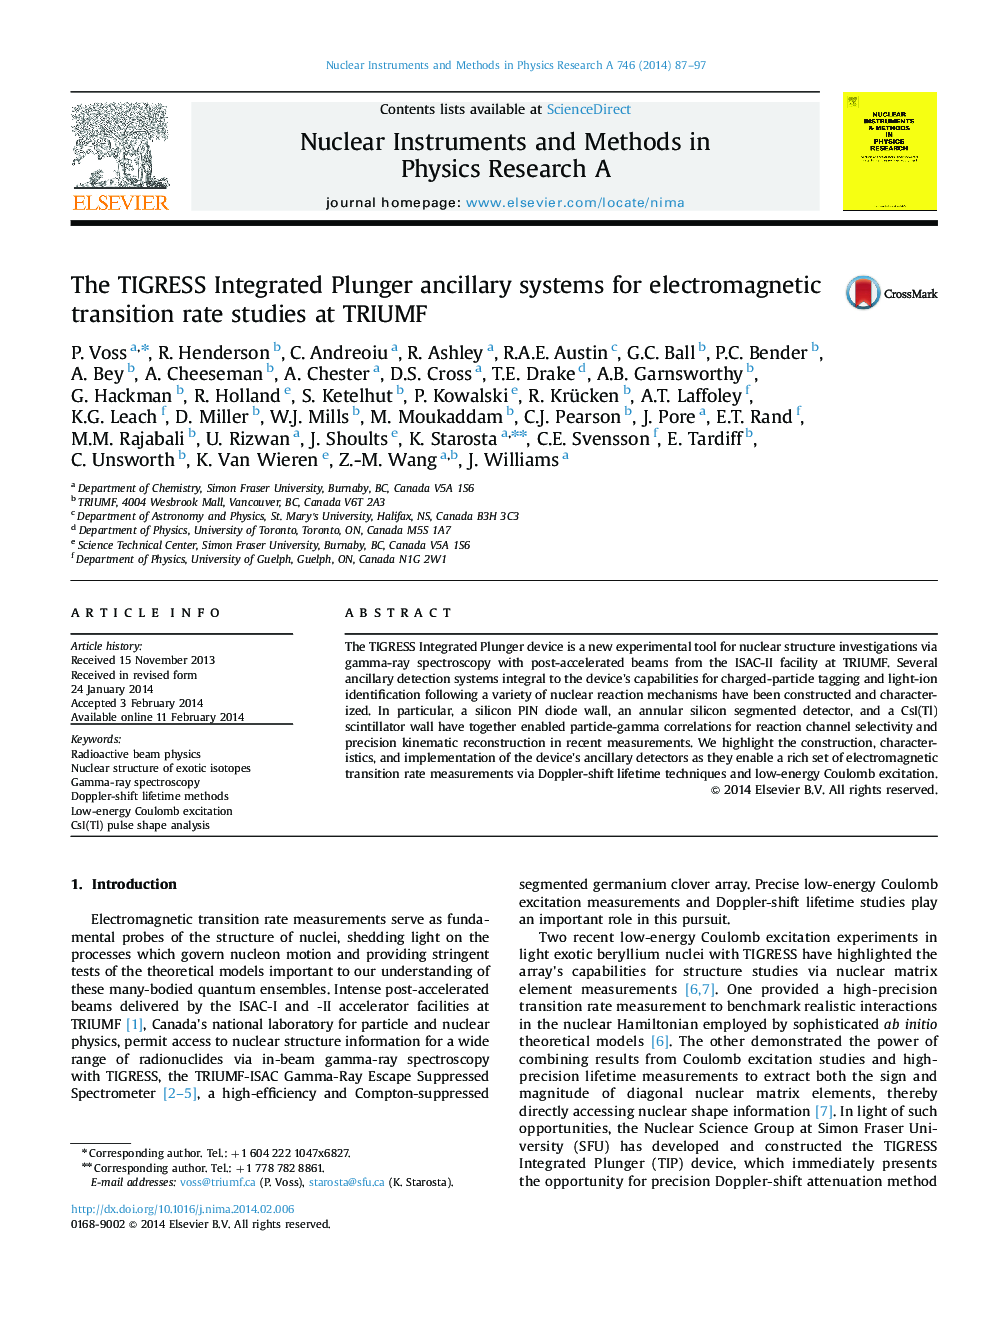 The TIGRESS Integrated Plunger ancillary systems for electromagnetic transition rate studies at TRIUMF